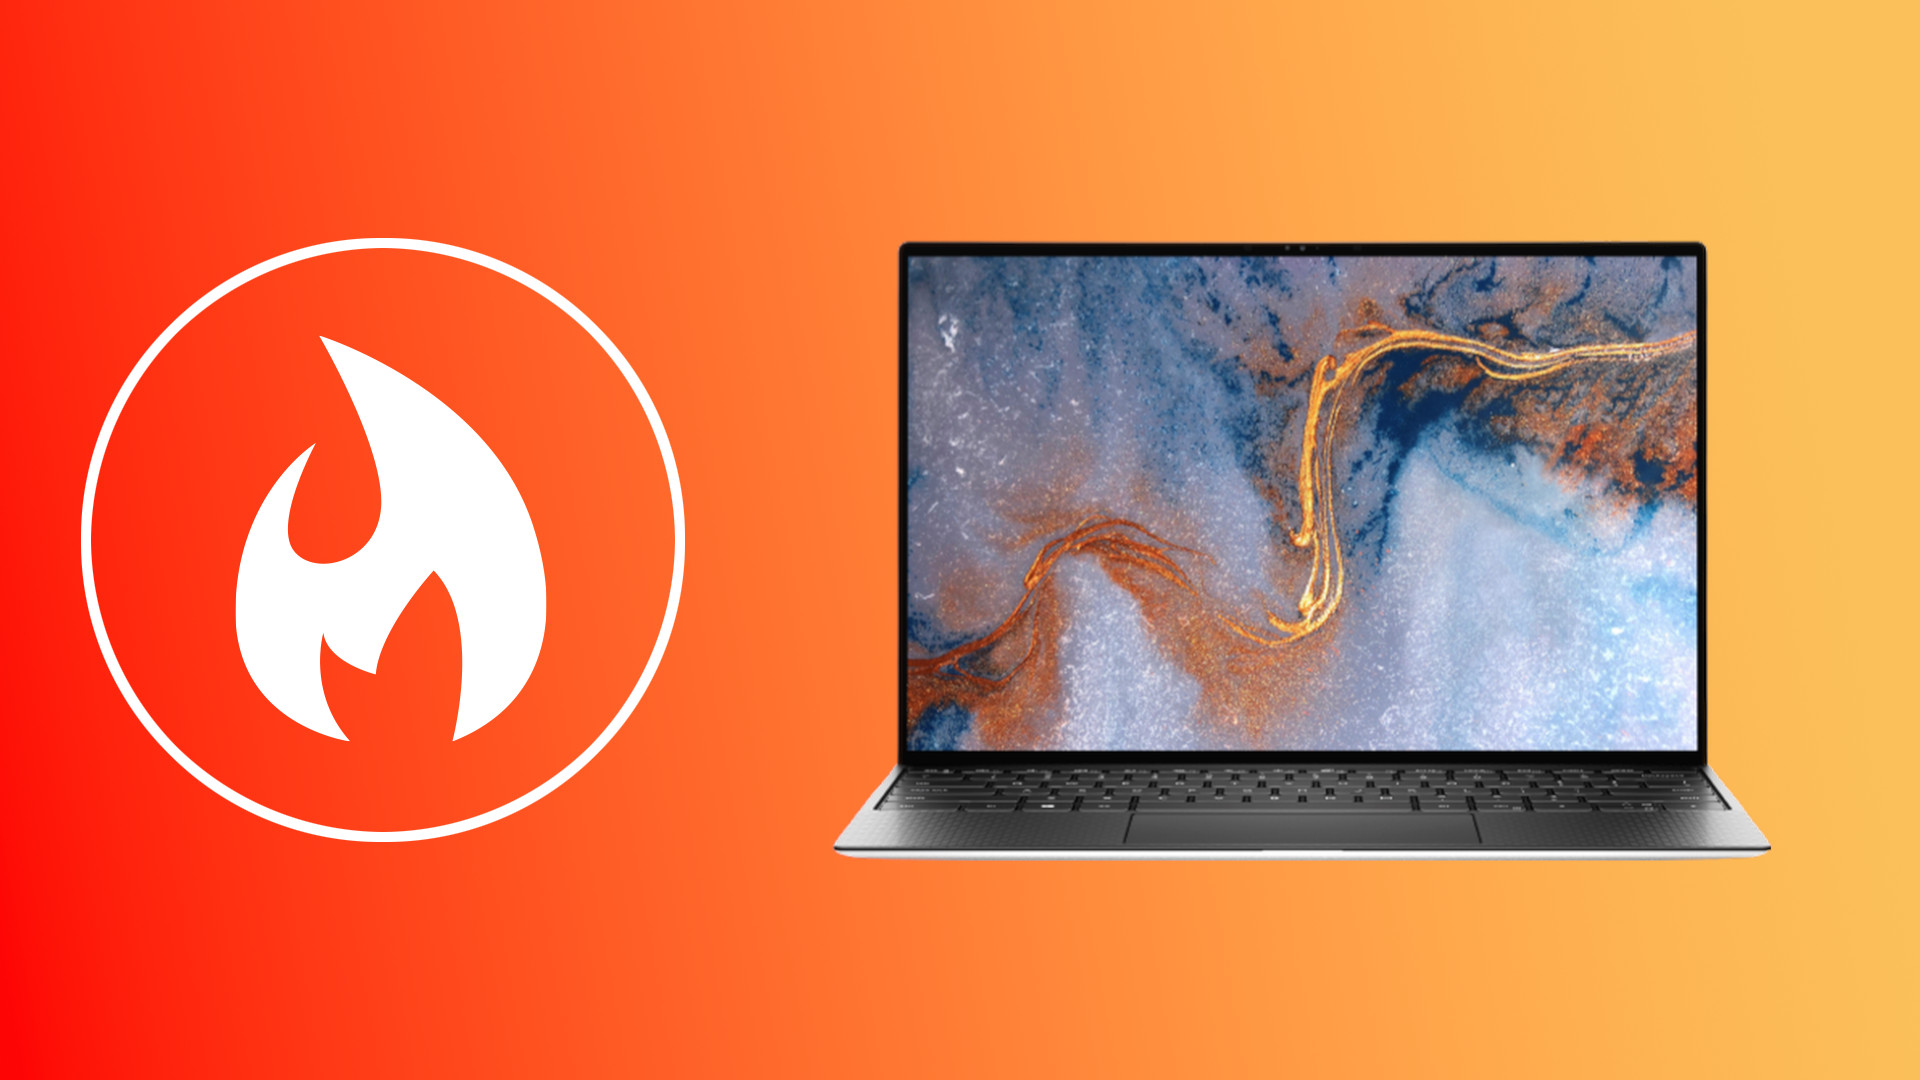 Dell XPS 13 on orange background with heat symbol